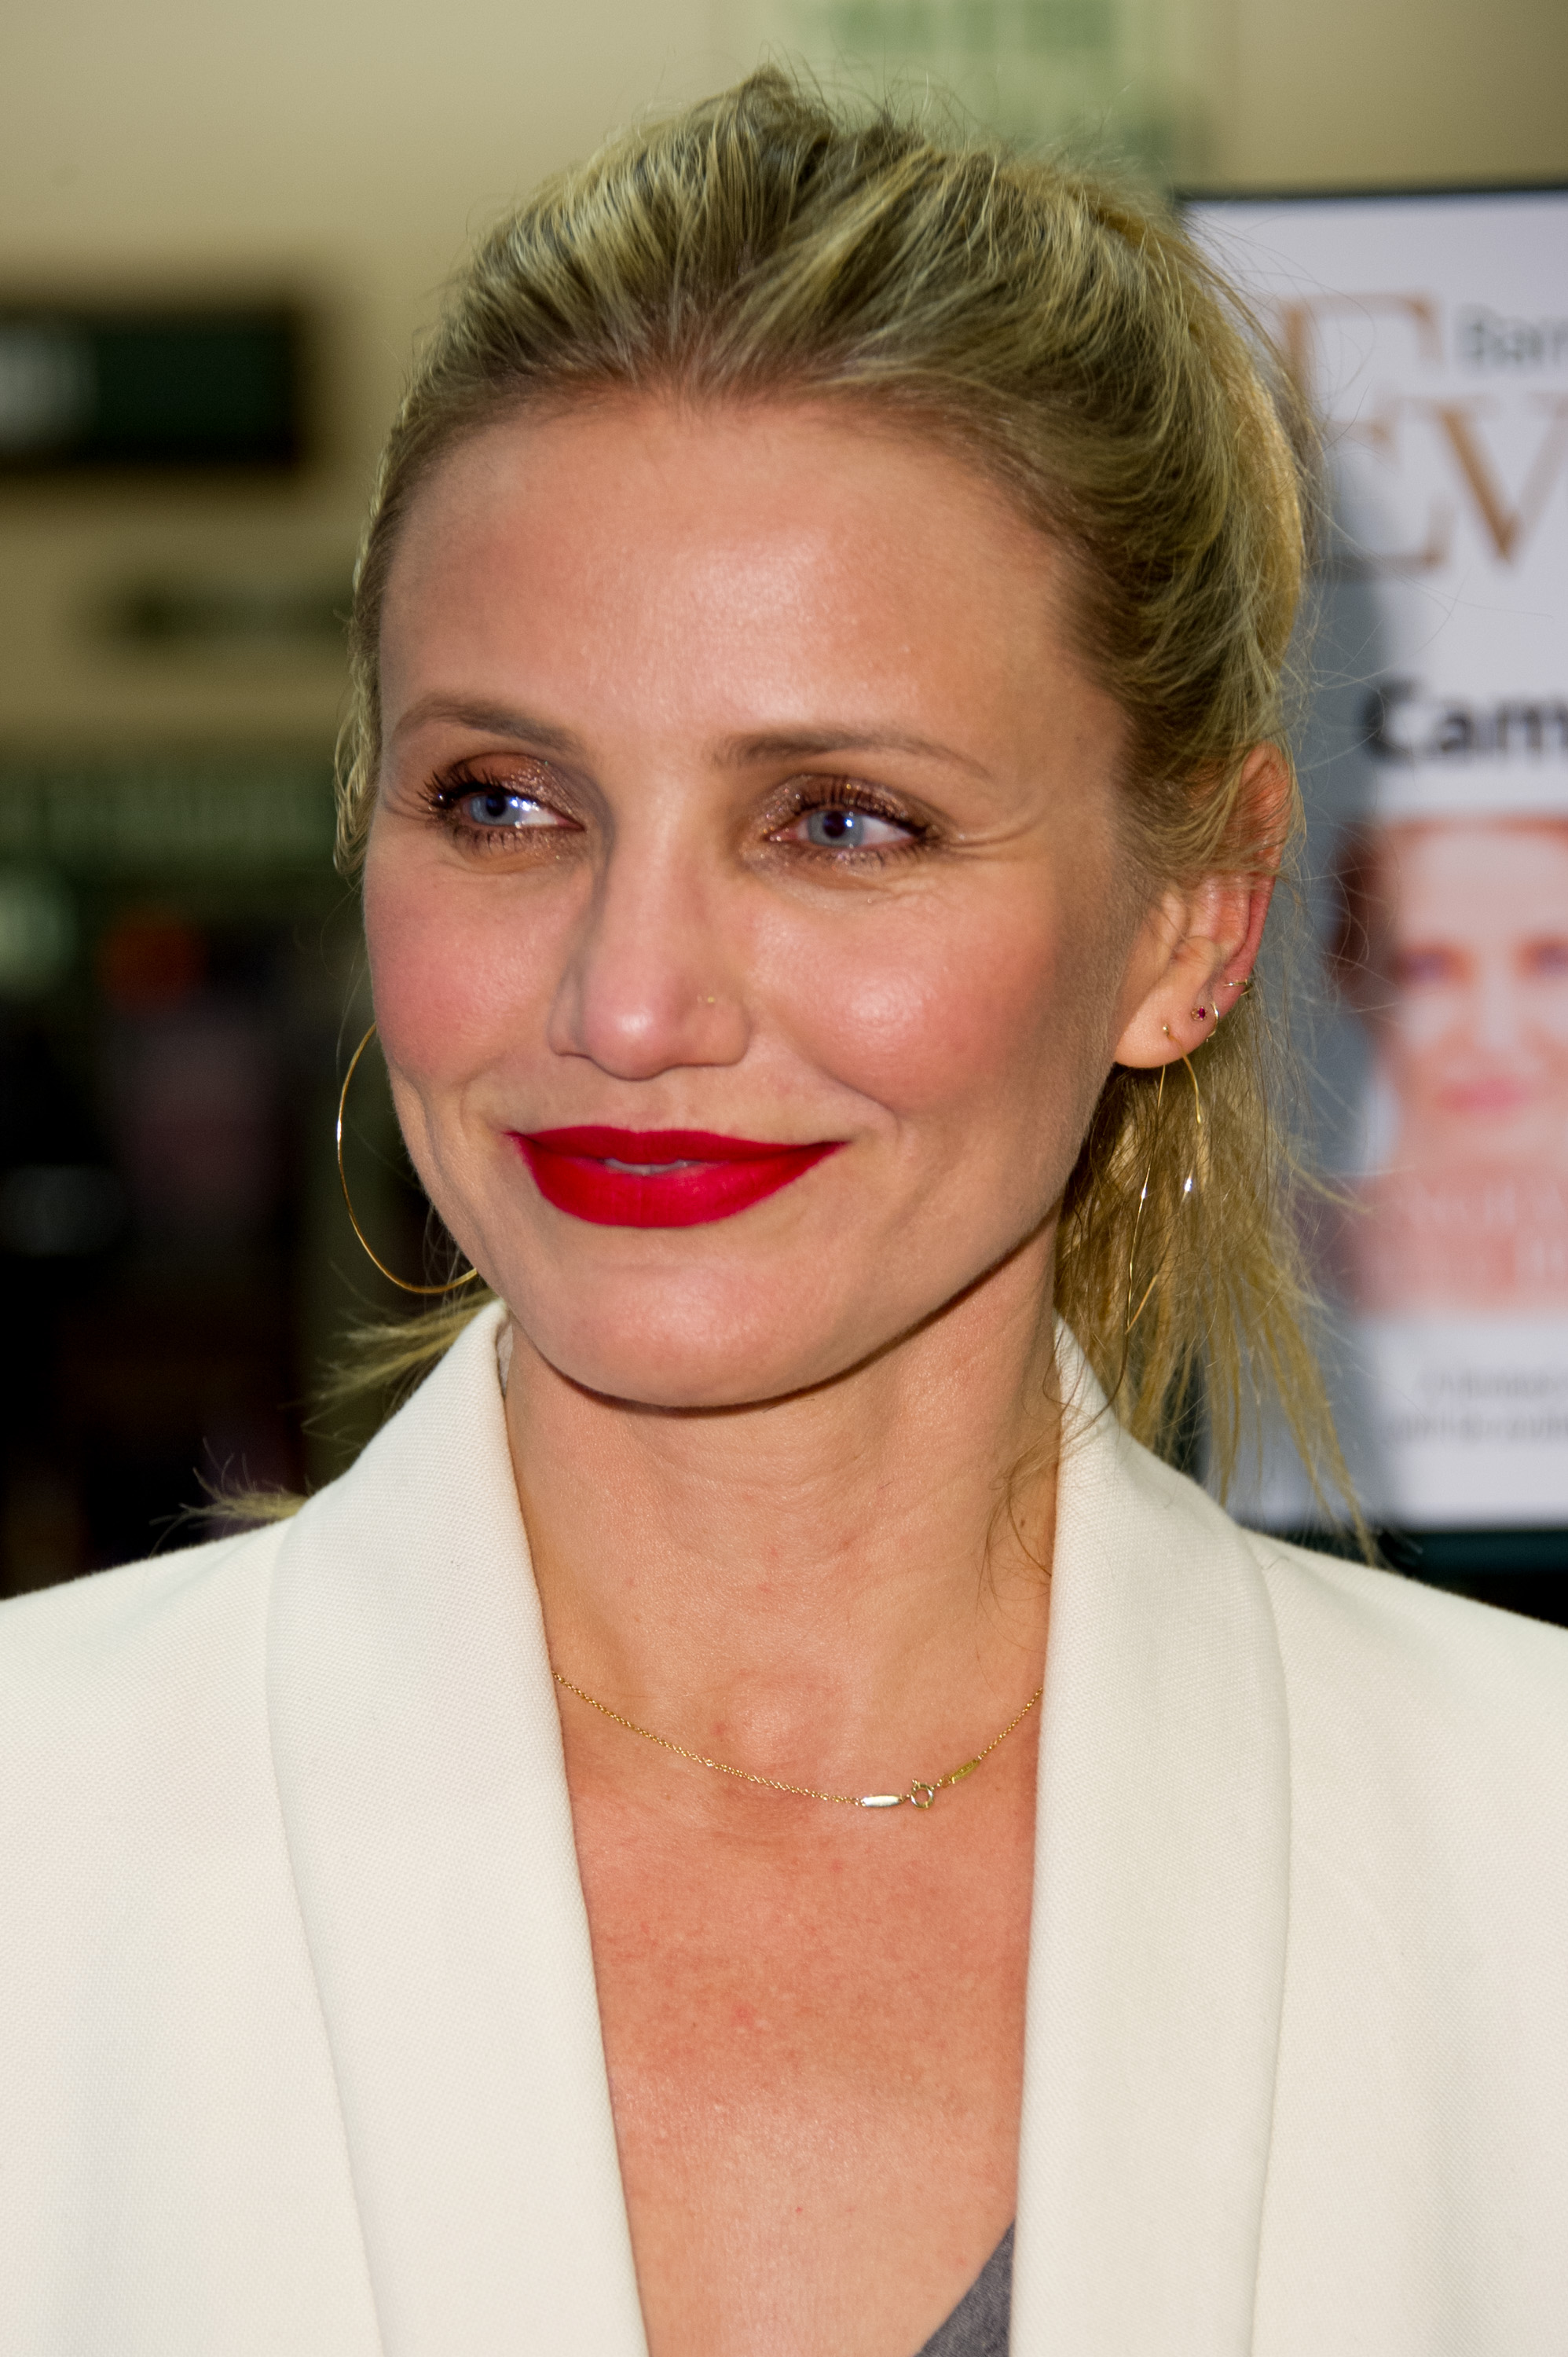 Cameron Diaz poses during the book signing event for "The Longevity Book" at Barnes & Noble in Huntington Beach, California on April 14, 2016 | Source: Getty Images